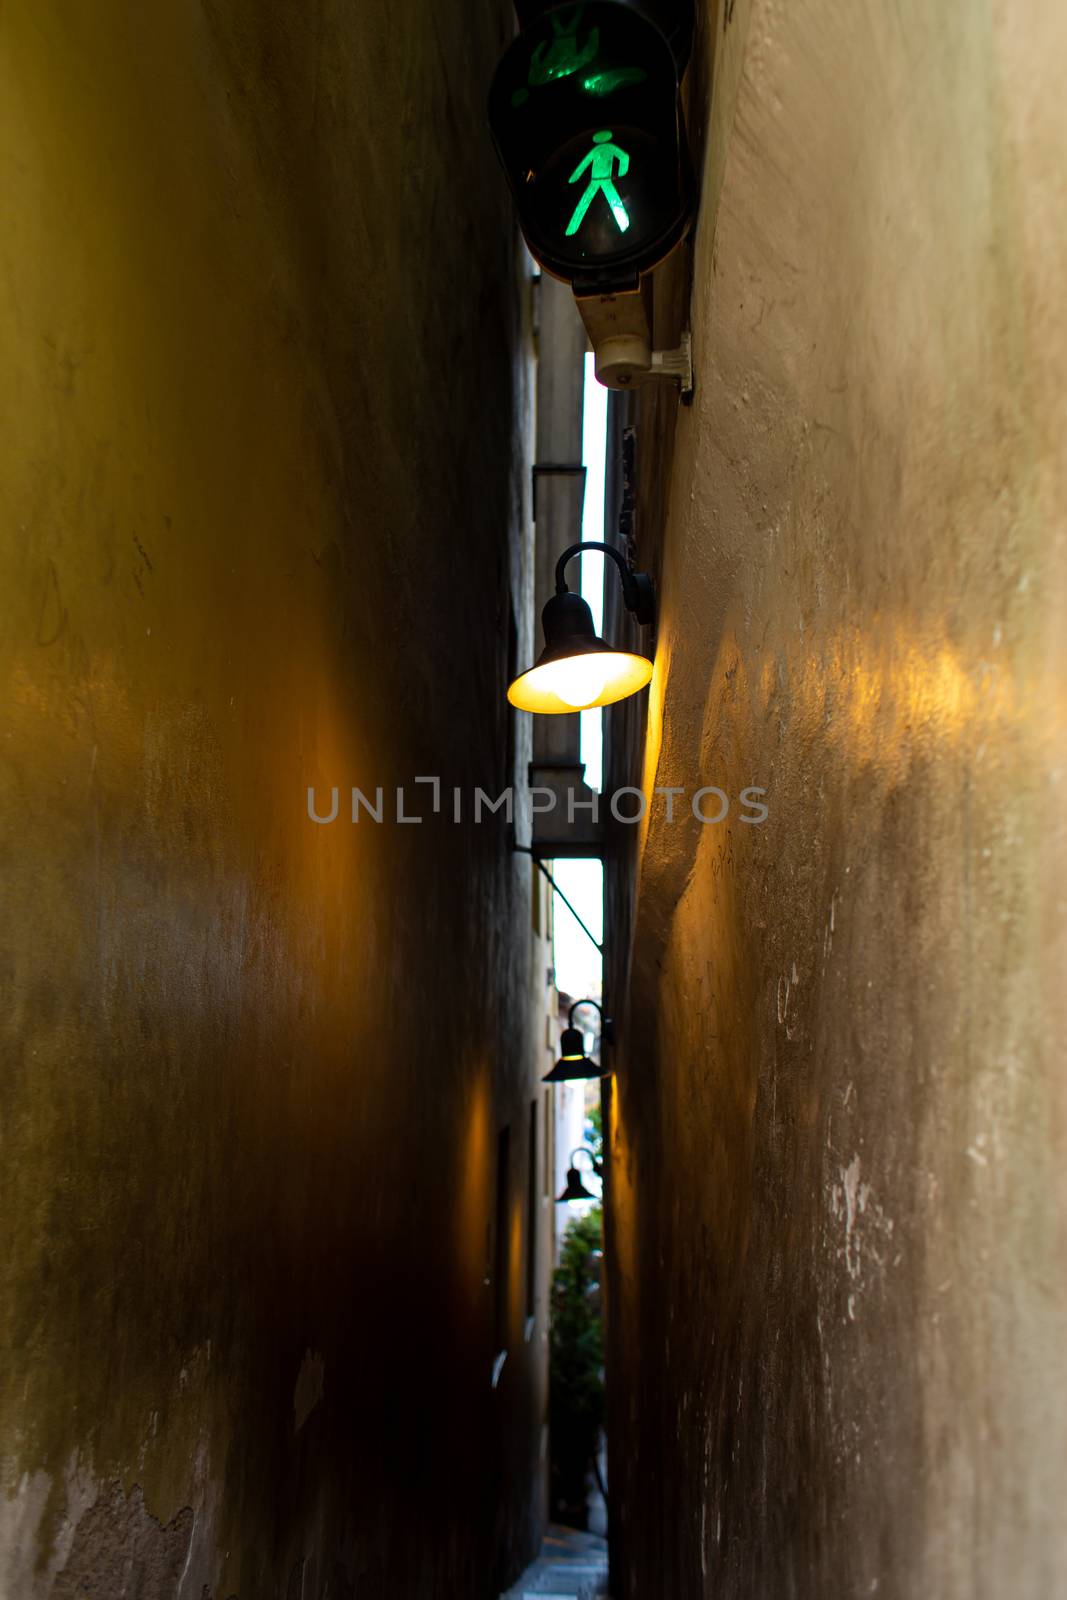 The architecture of the strago city of Prague. The narrowest street in Europe. The passage between buildings for one person, regulated by traffic lights by Try_my_best